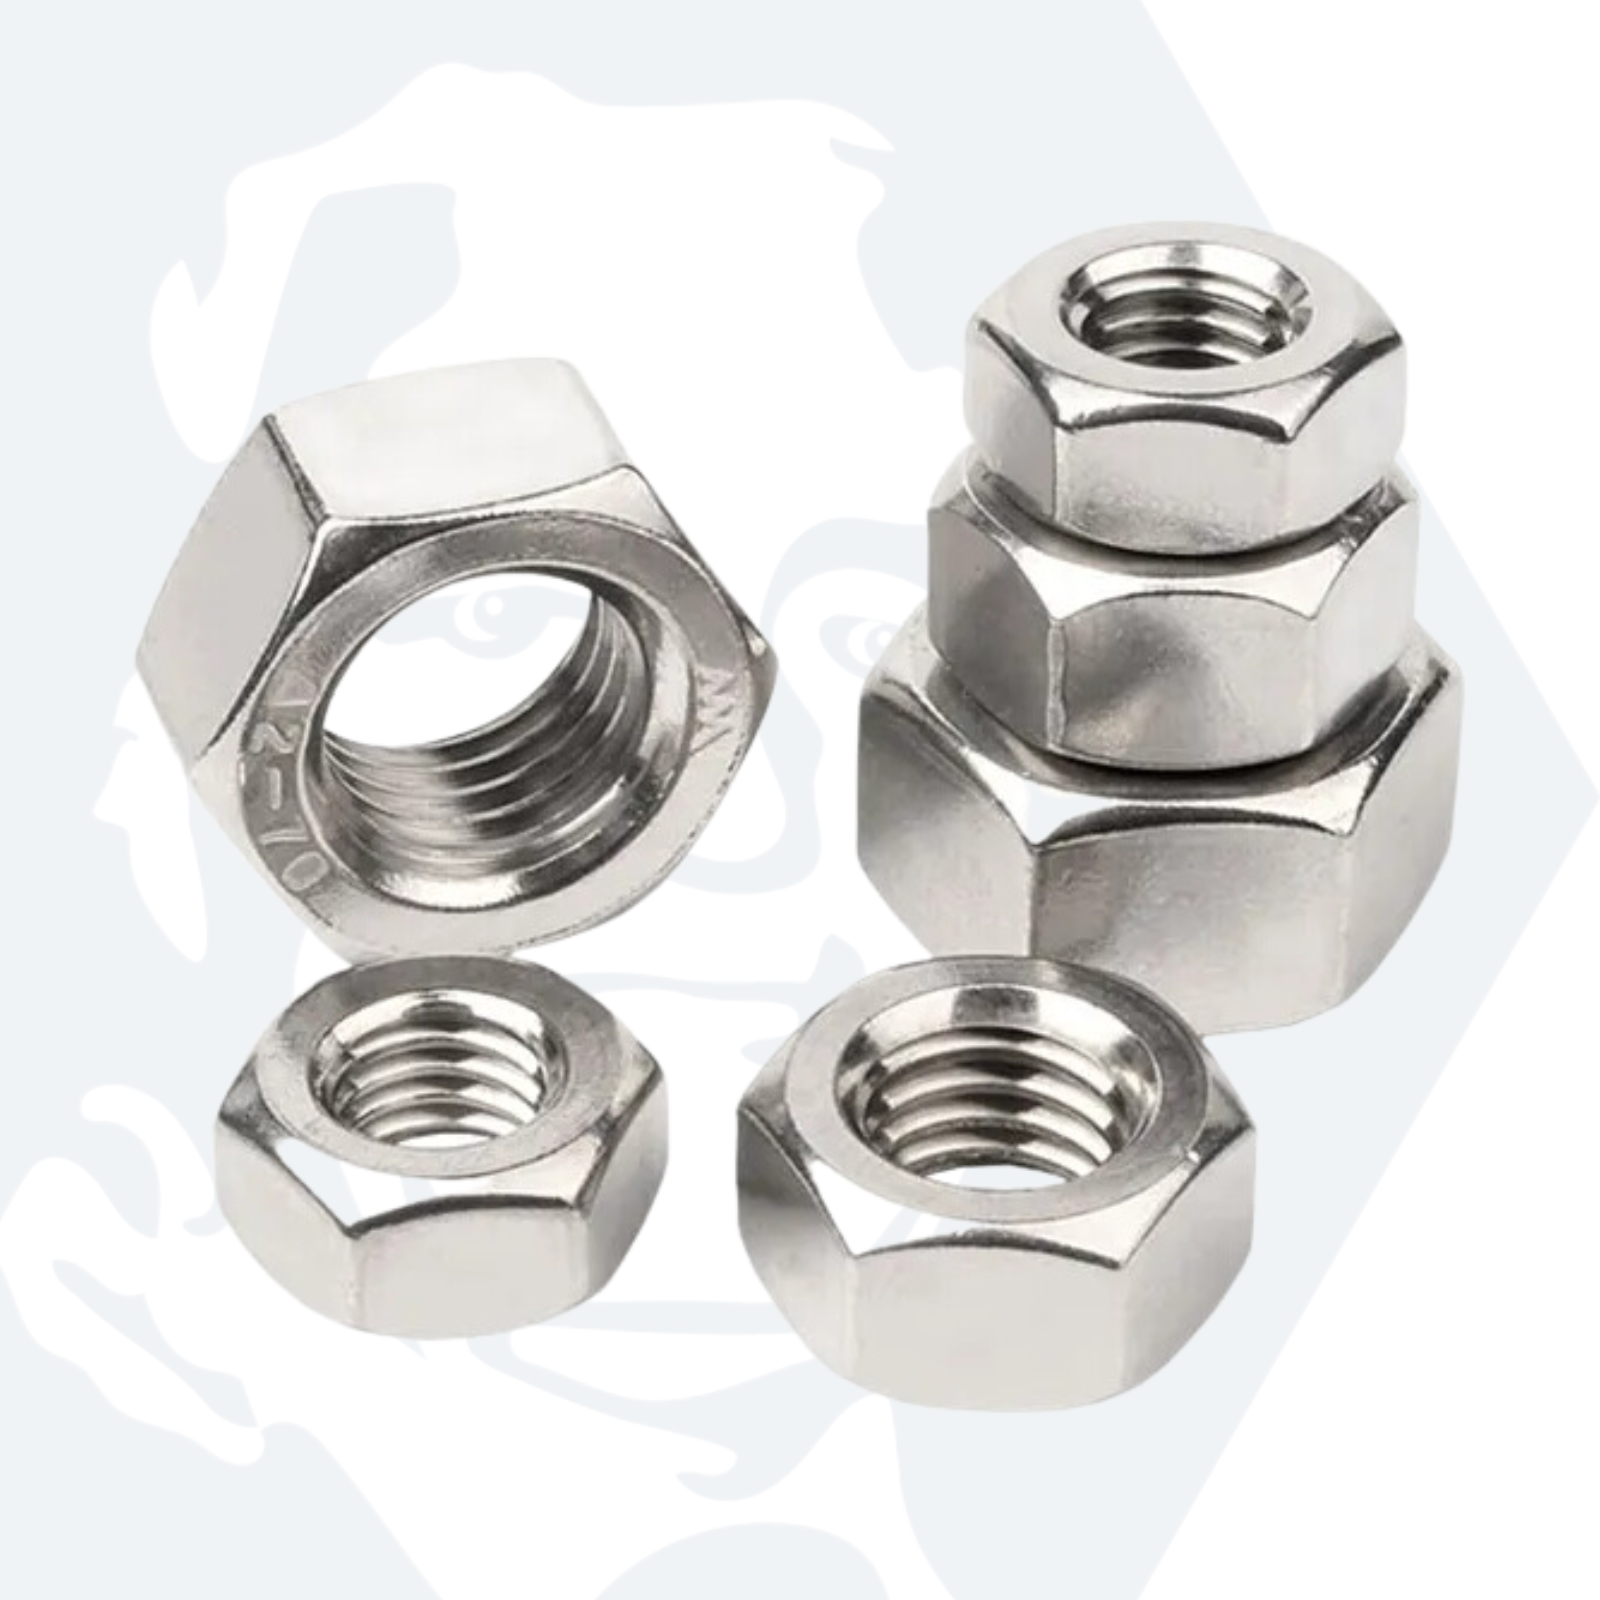 M4 Hexagon Nuts (DIN 934) - Stainless Steel (A2)